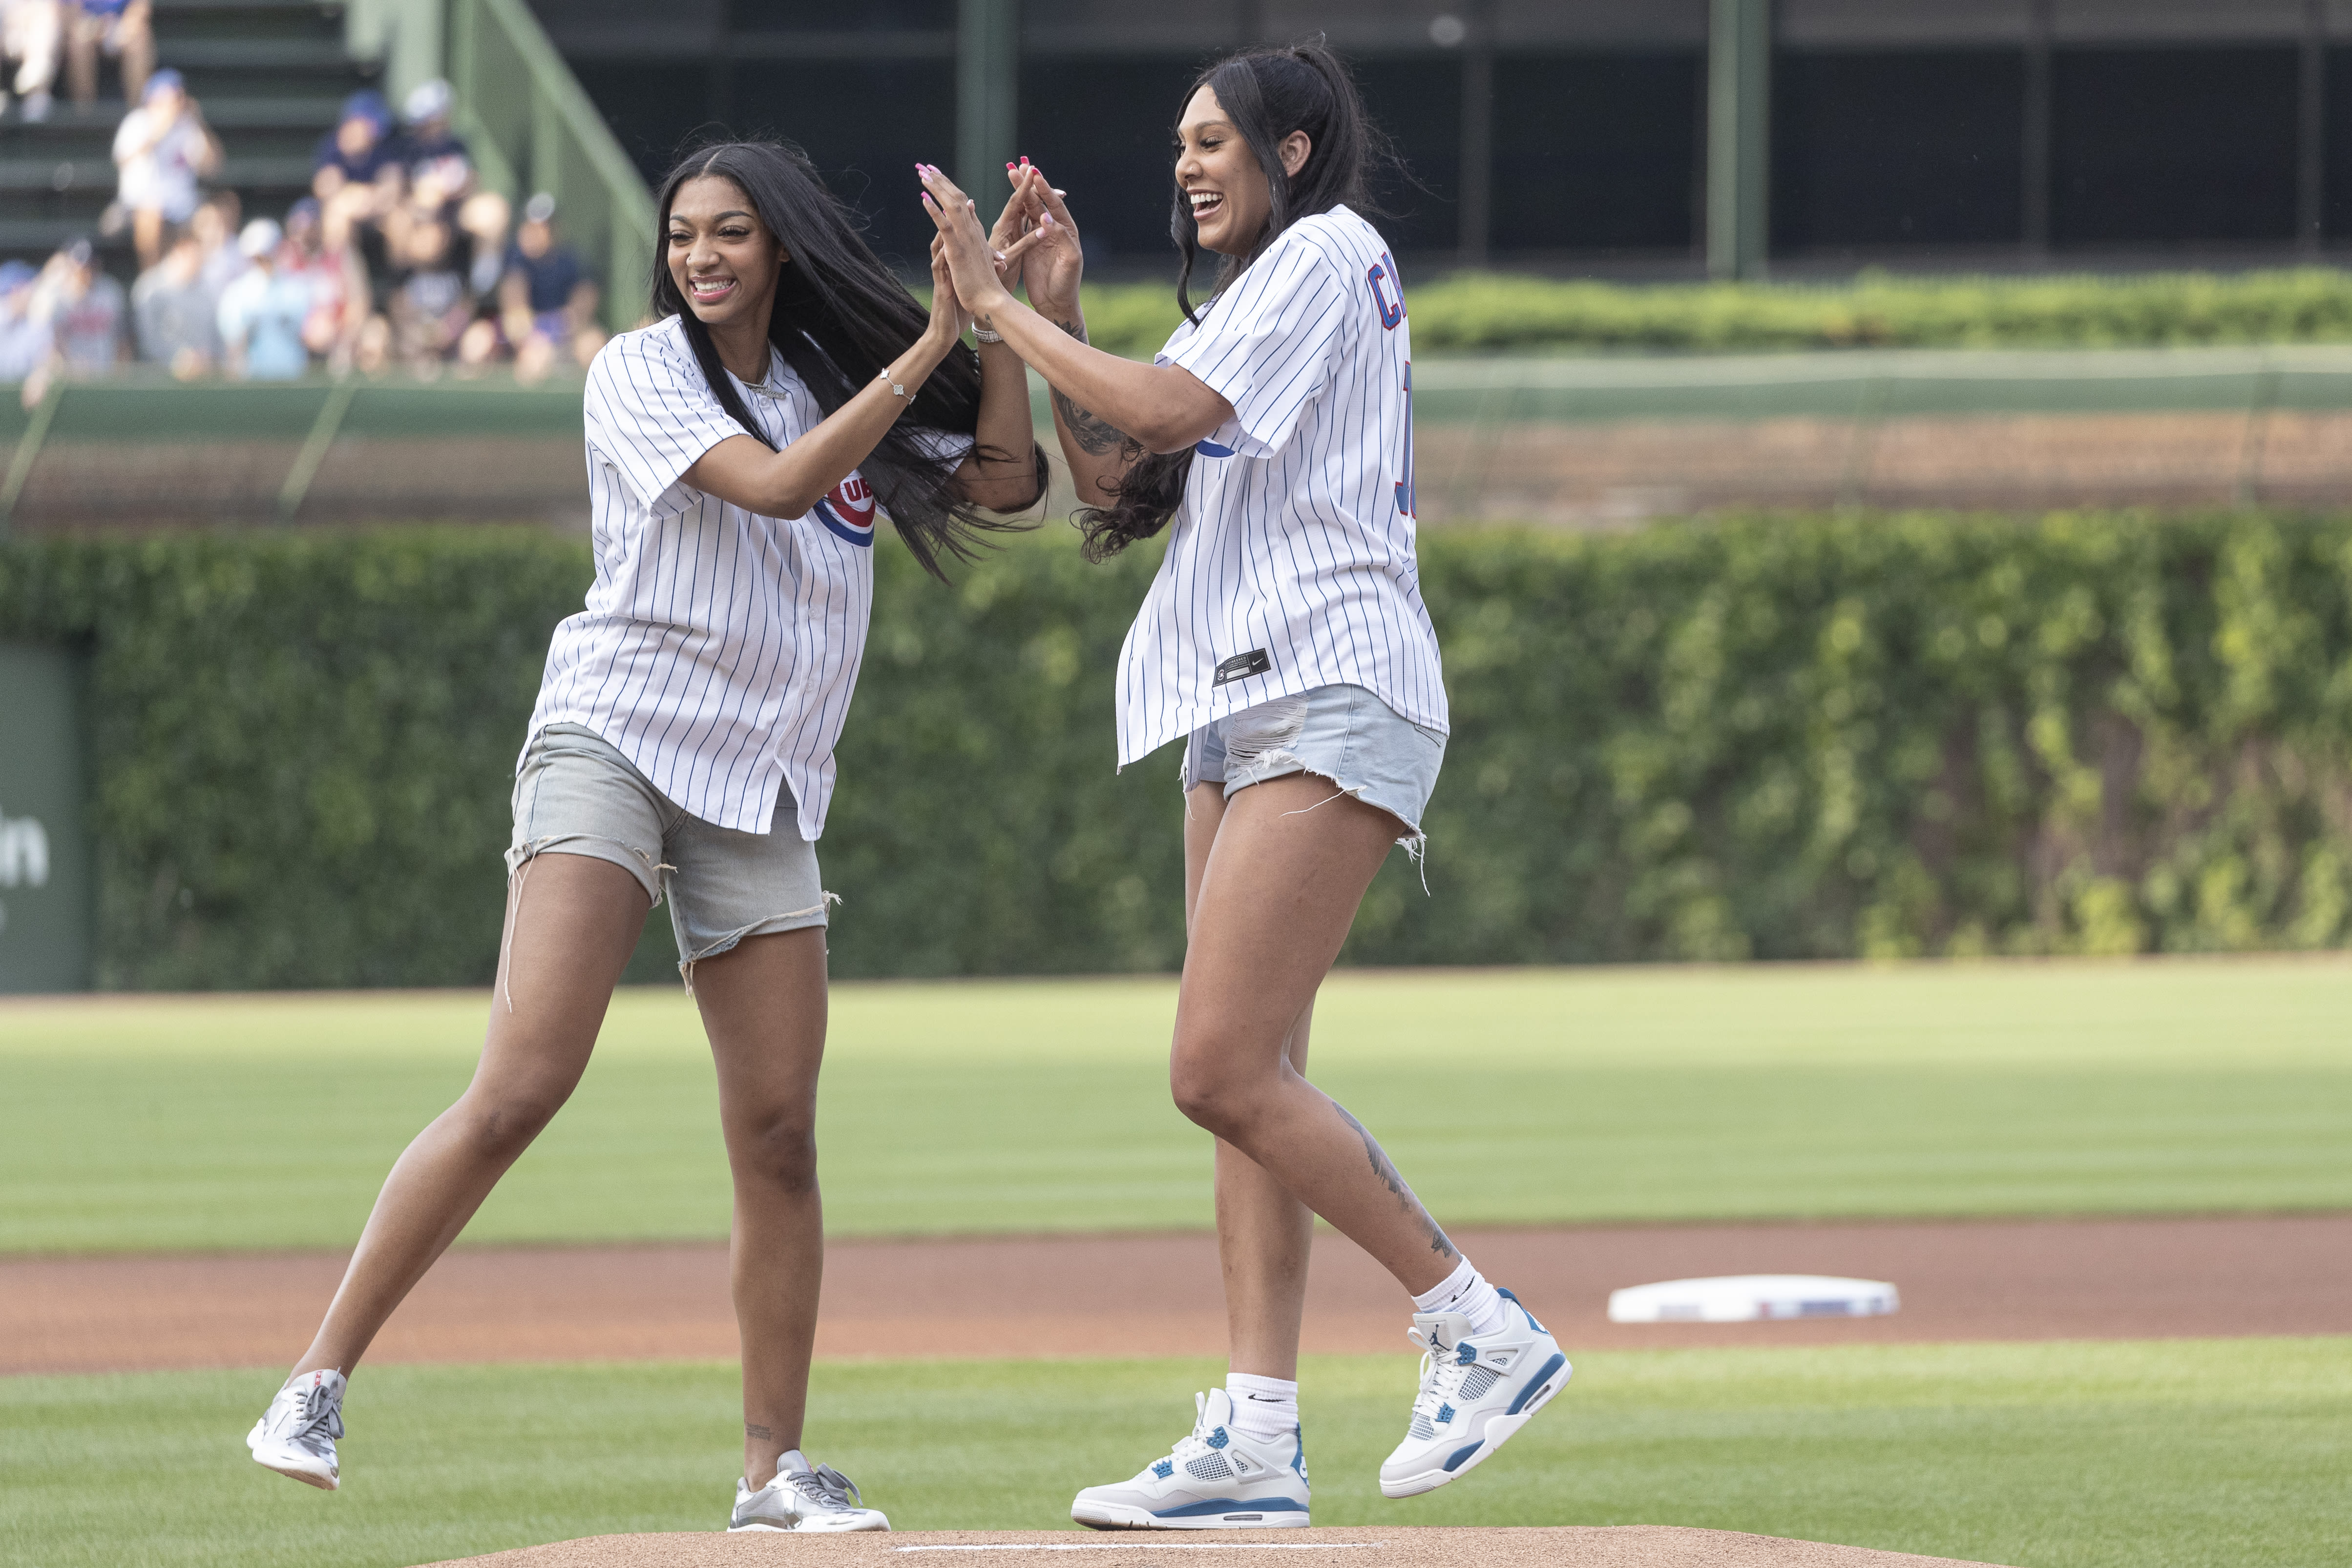 Watch: Angel Reese, Kamilla Cardoso throw out first pitch at Wrigley